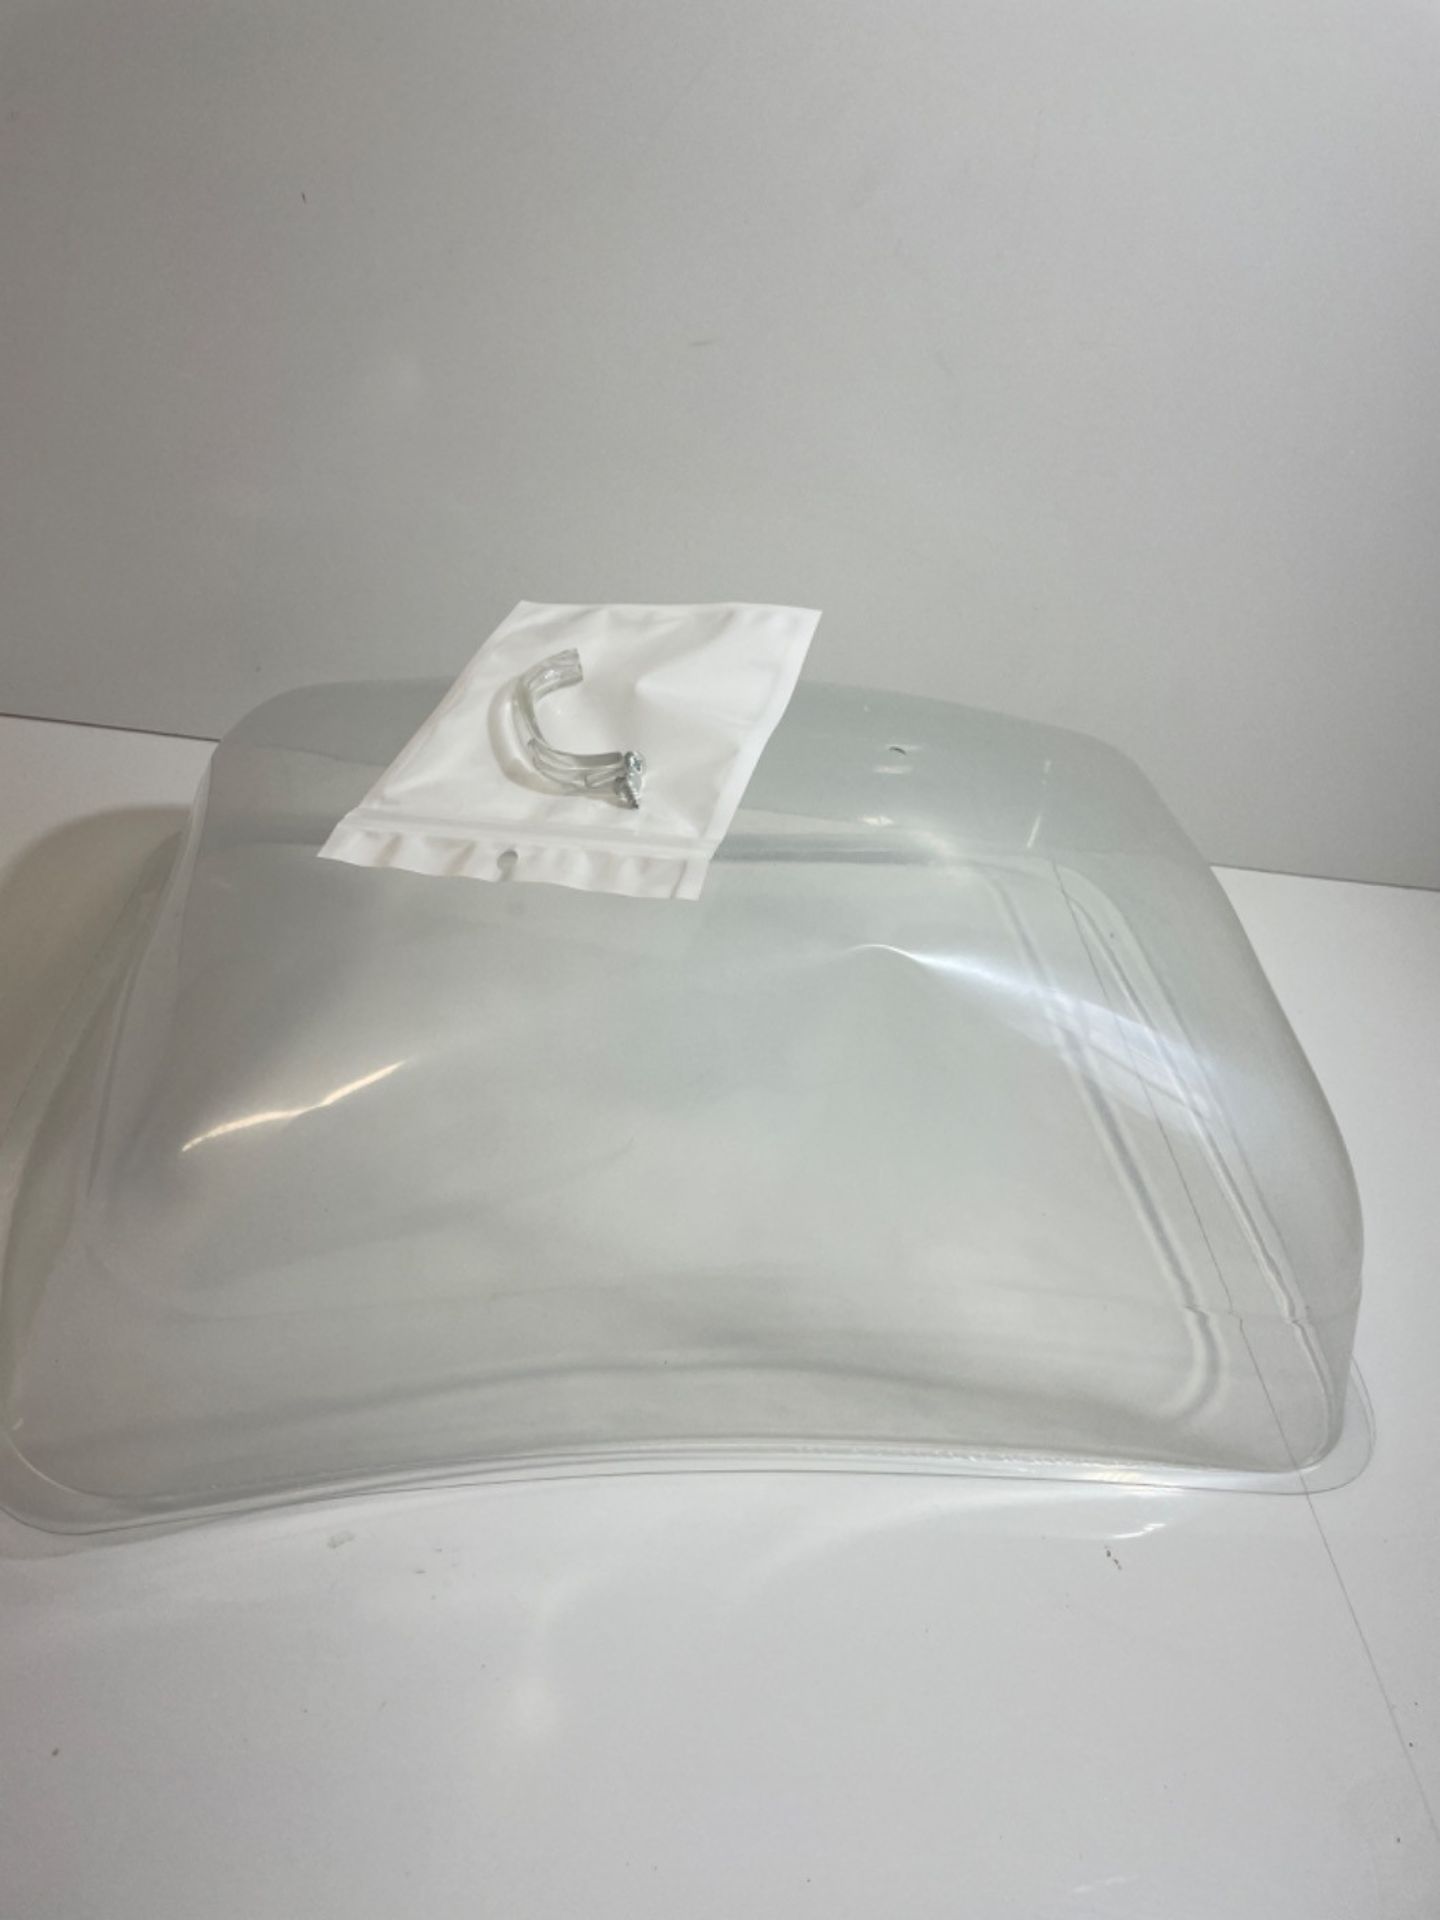 DOITOOL Cake Dome Cover Rectangular Clear Desert Cloche Display Cake Plate Serving Platter Cheese C - Image 2 of 3